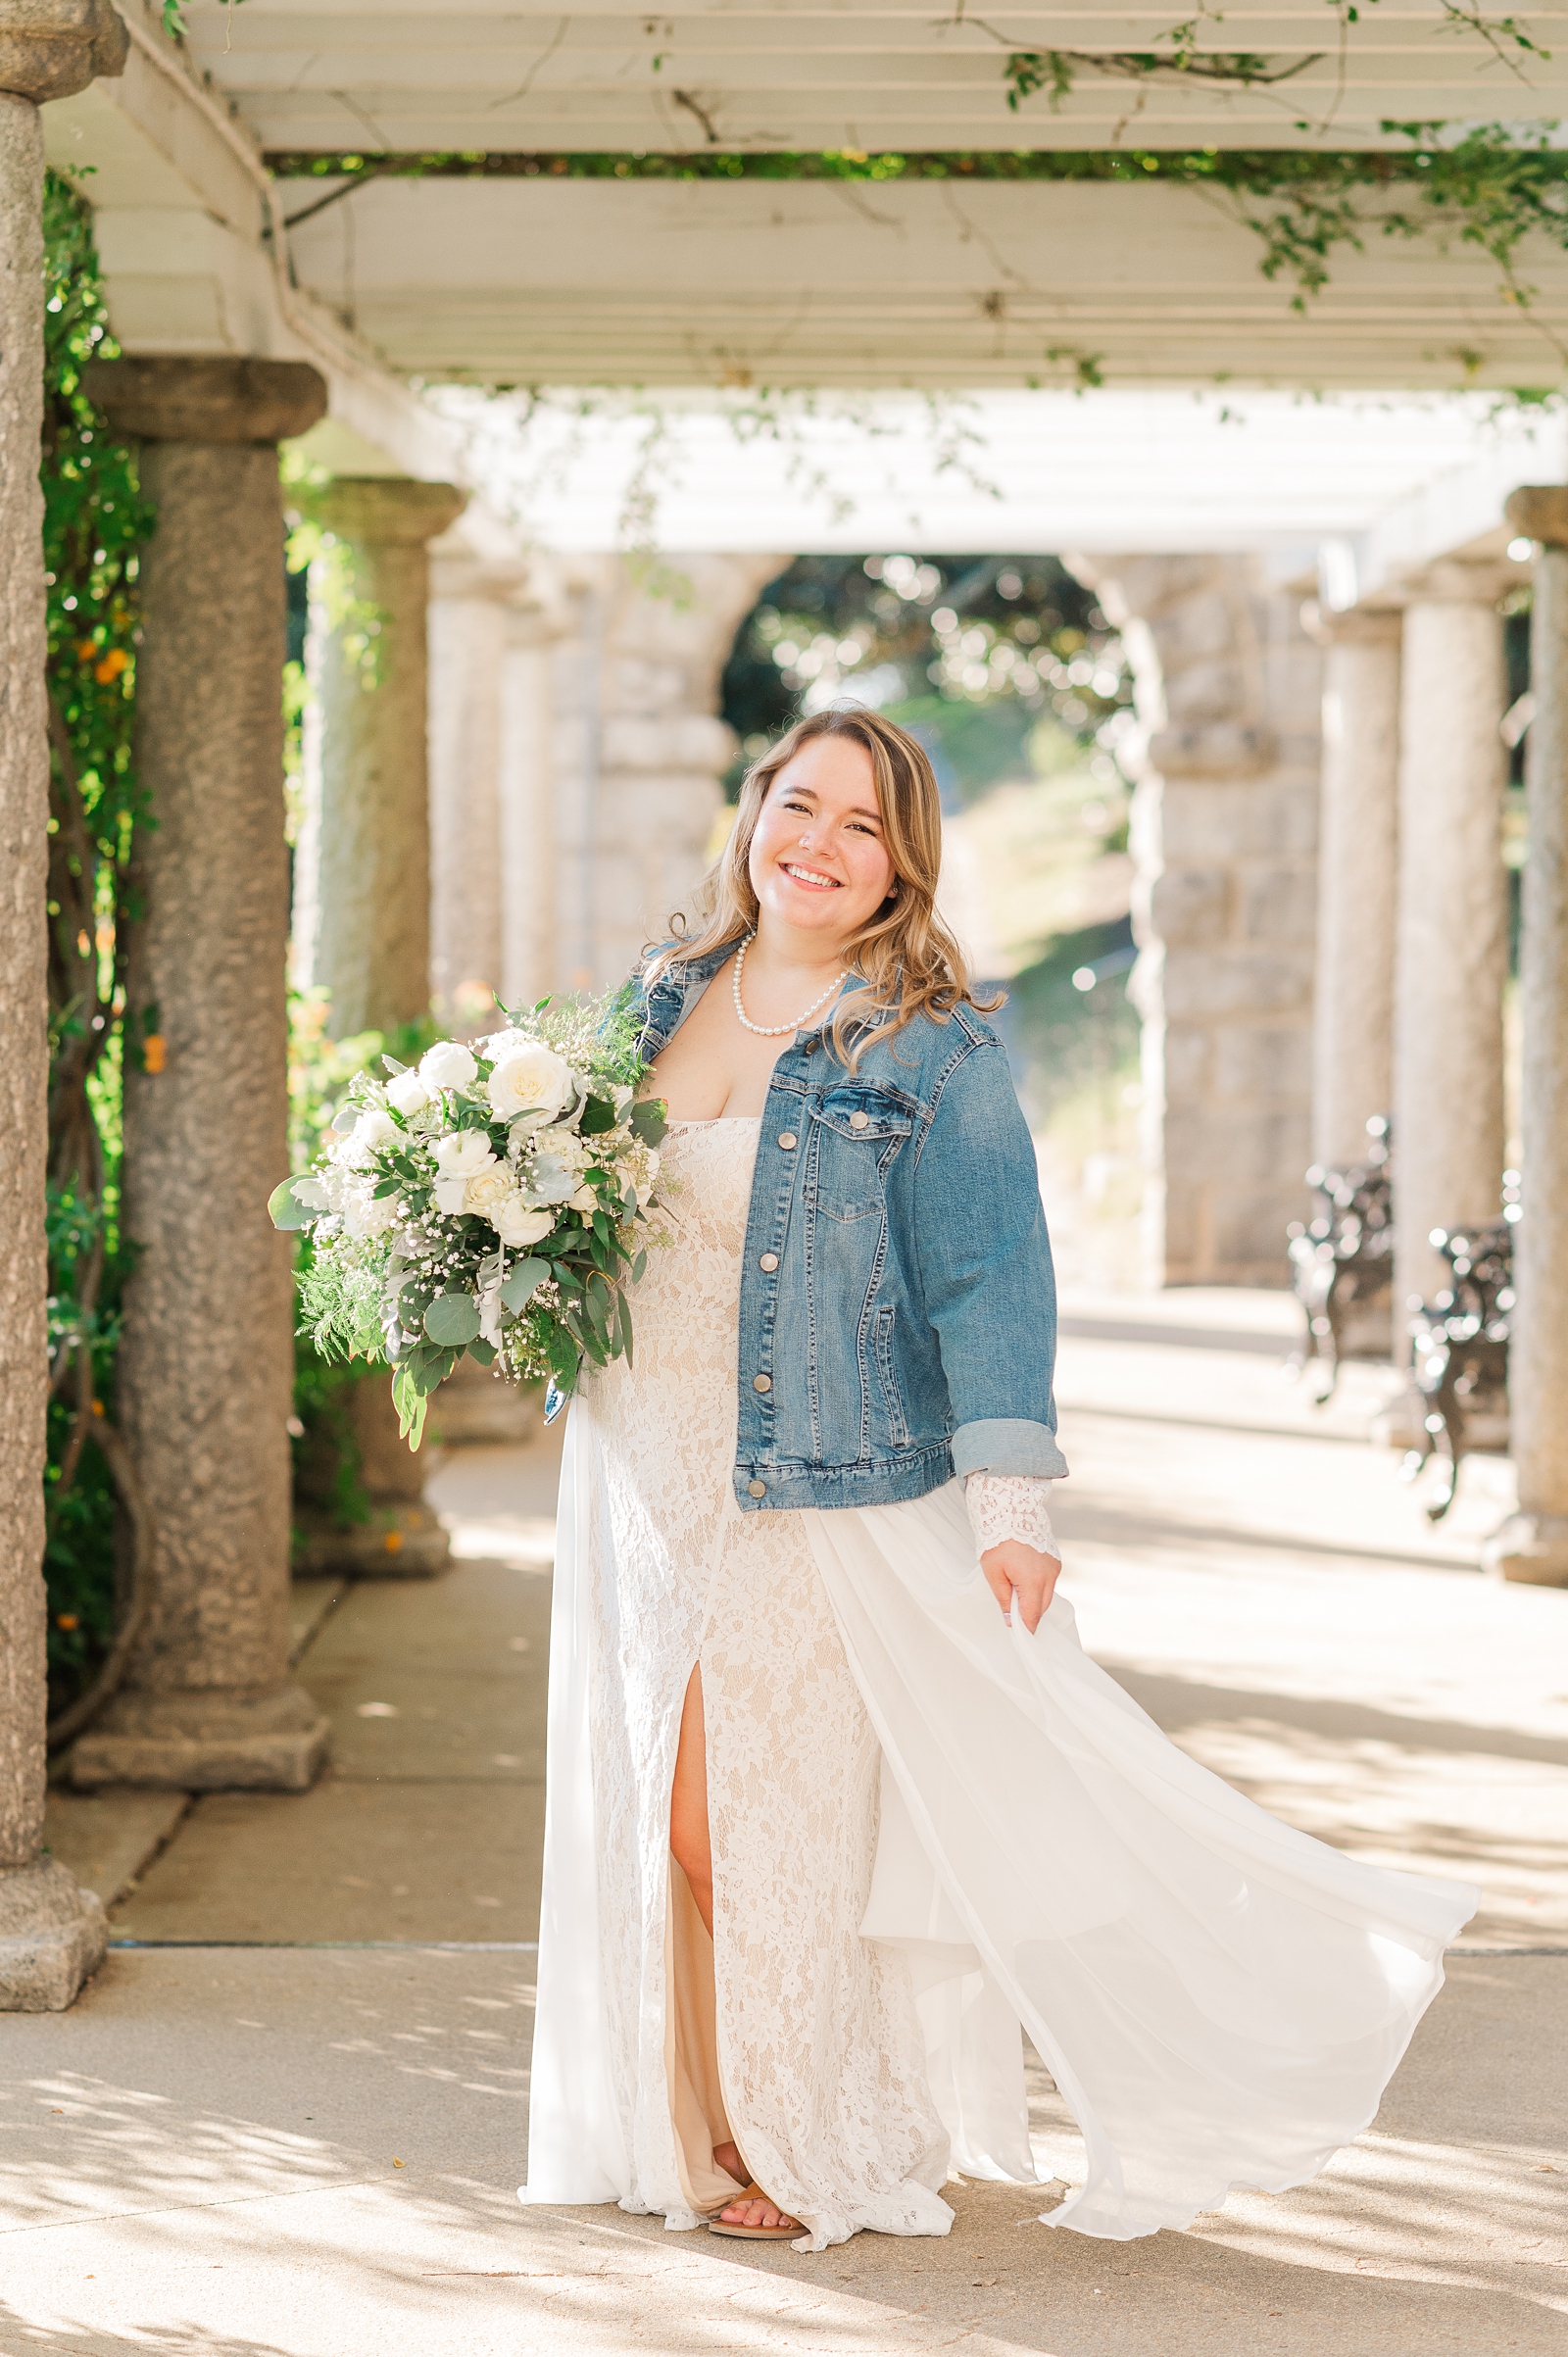 Bridal Portraits with Jean Jacket at Maymont Italian Gardens. Richmond Wedding Photography by Kailey Brianne Photography.